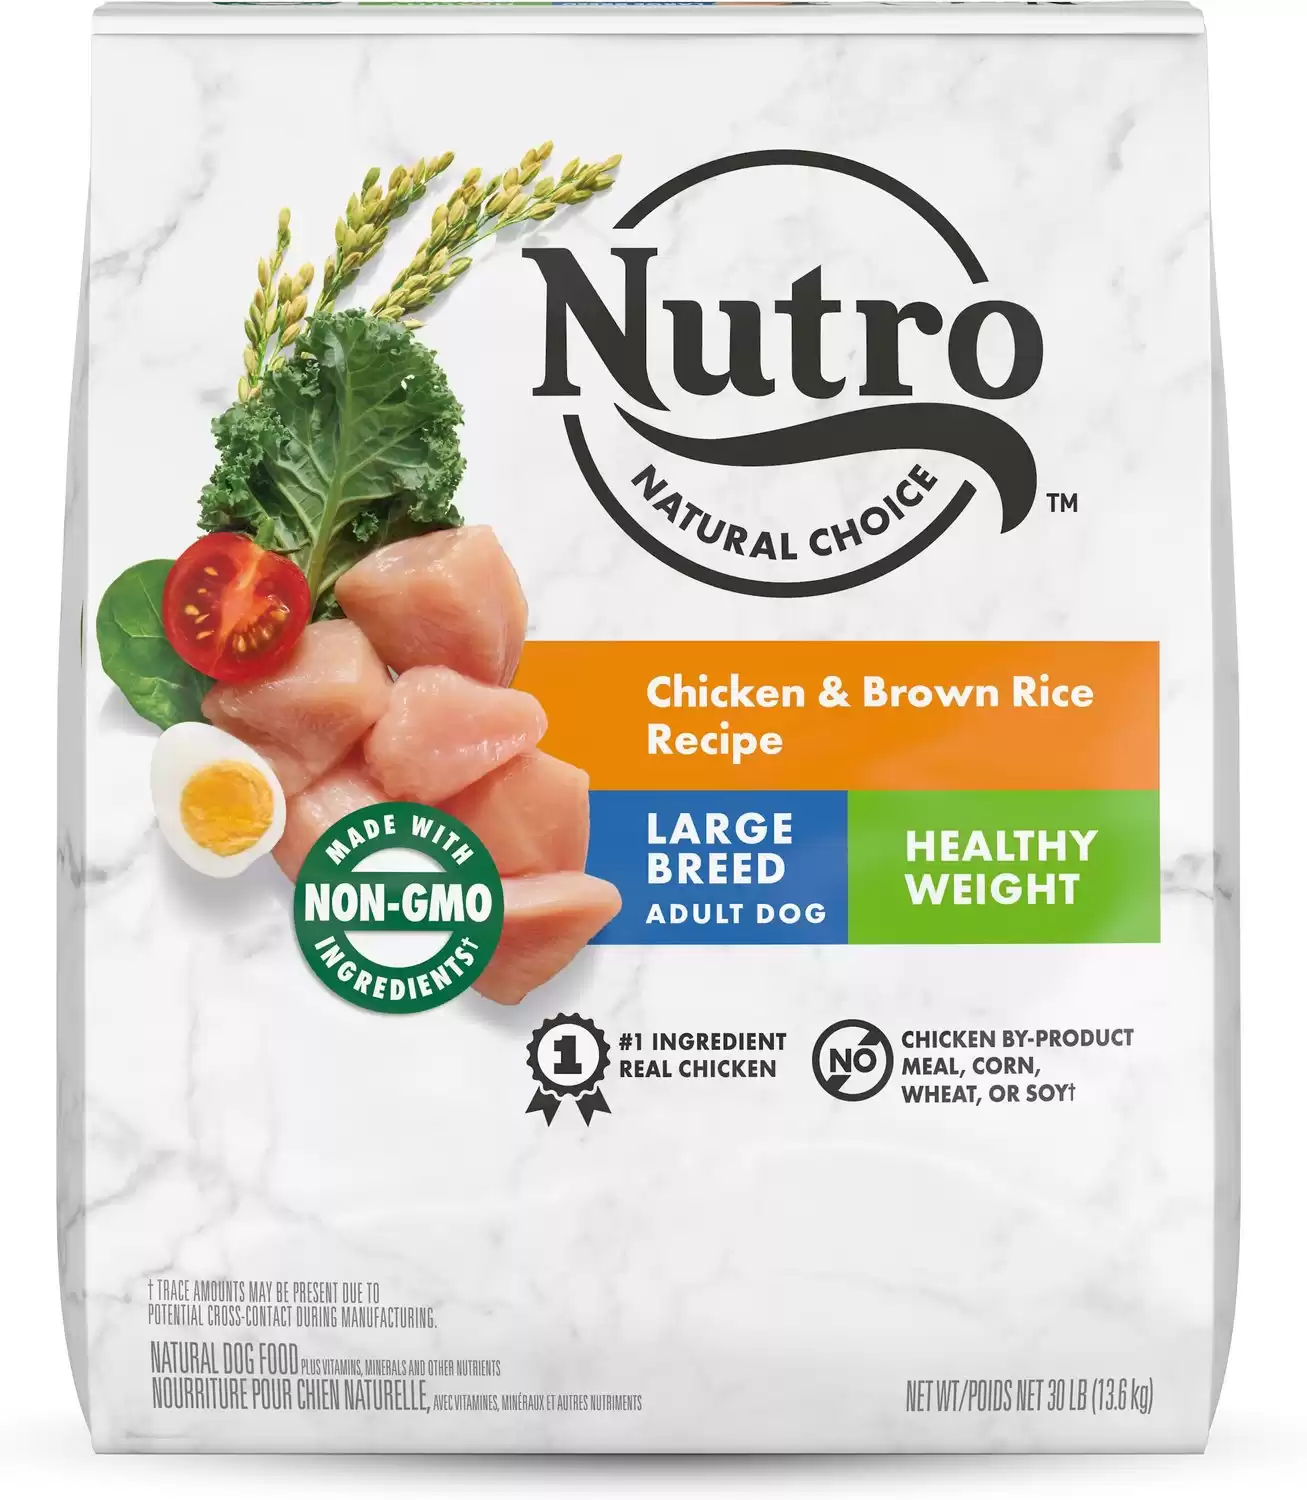 Nutro Natural Choice Healthy Weight